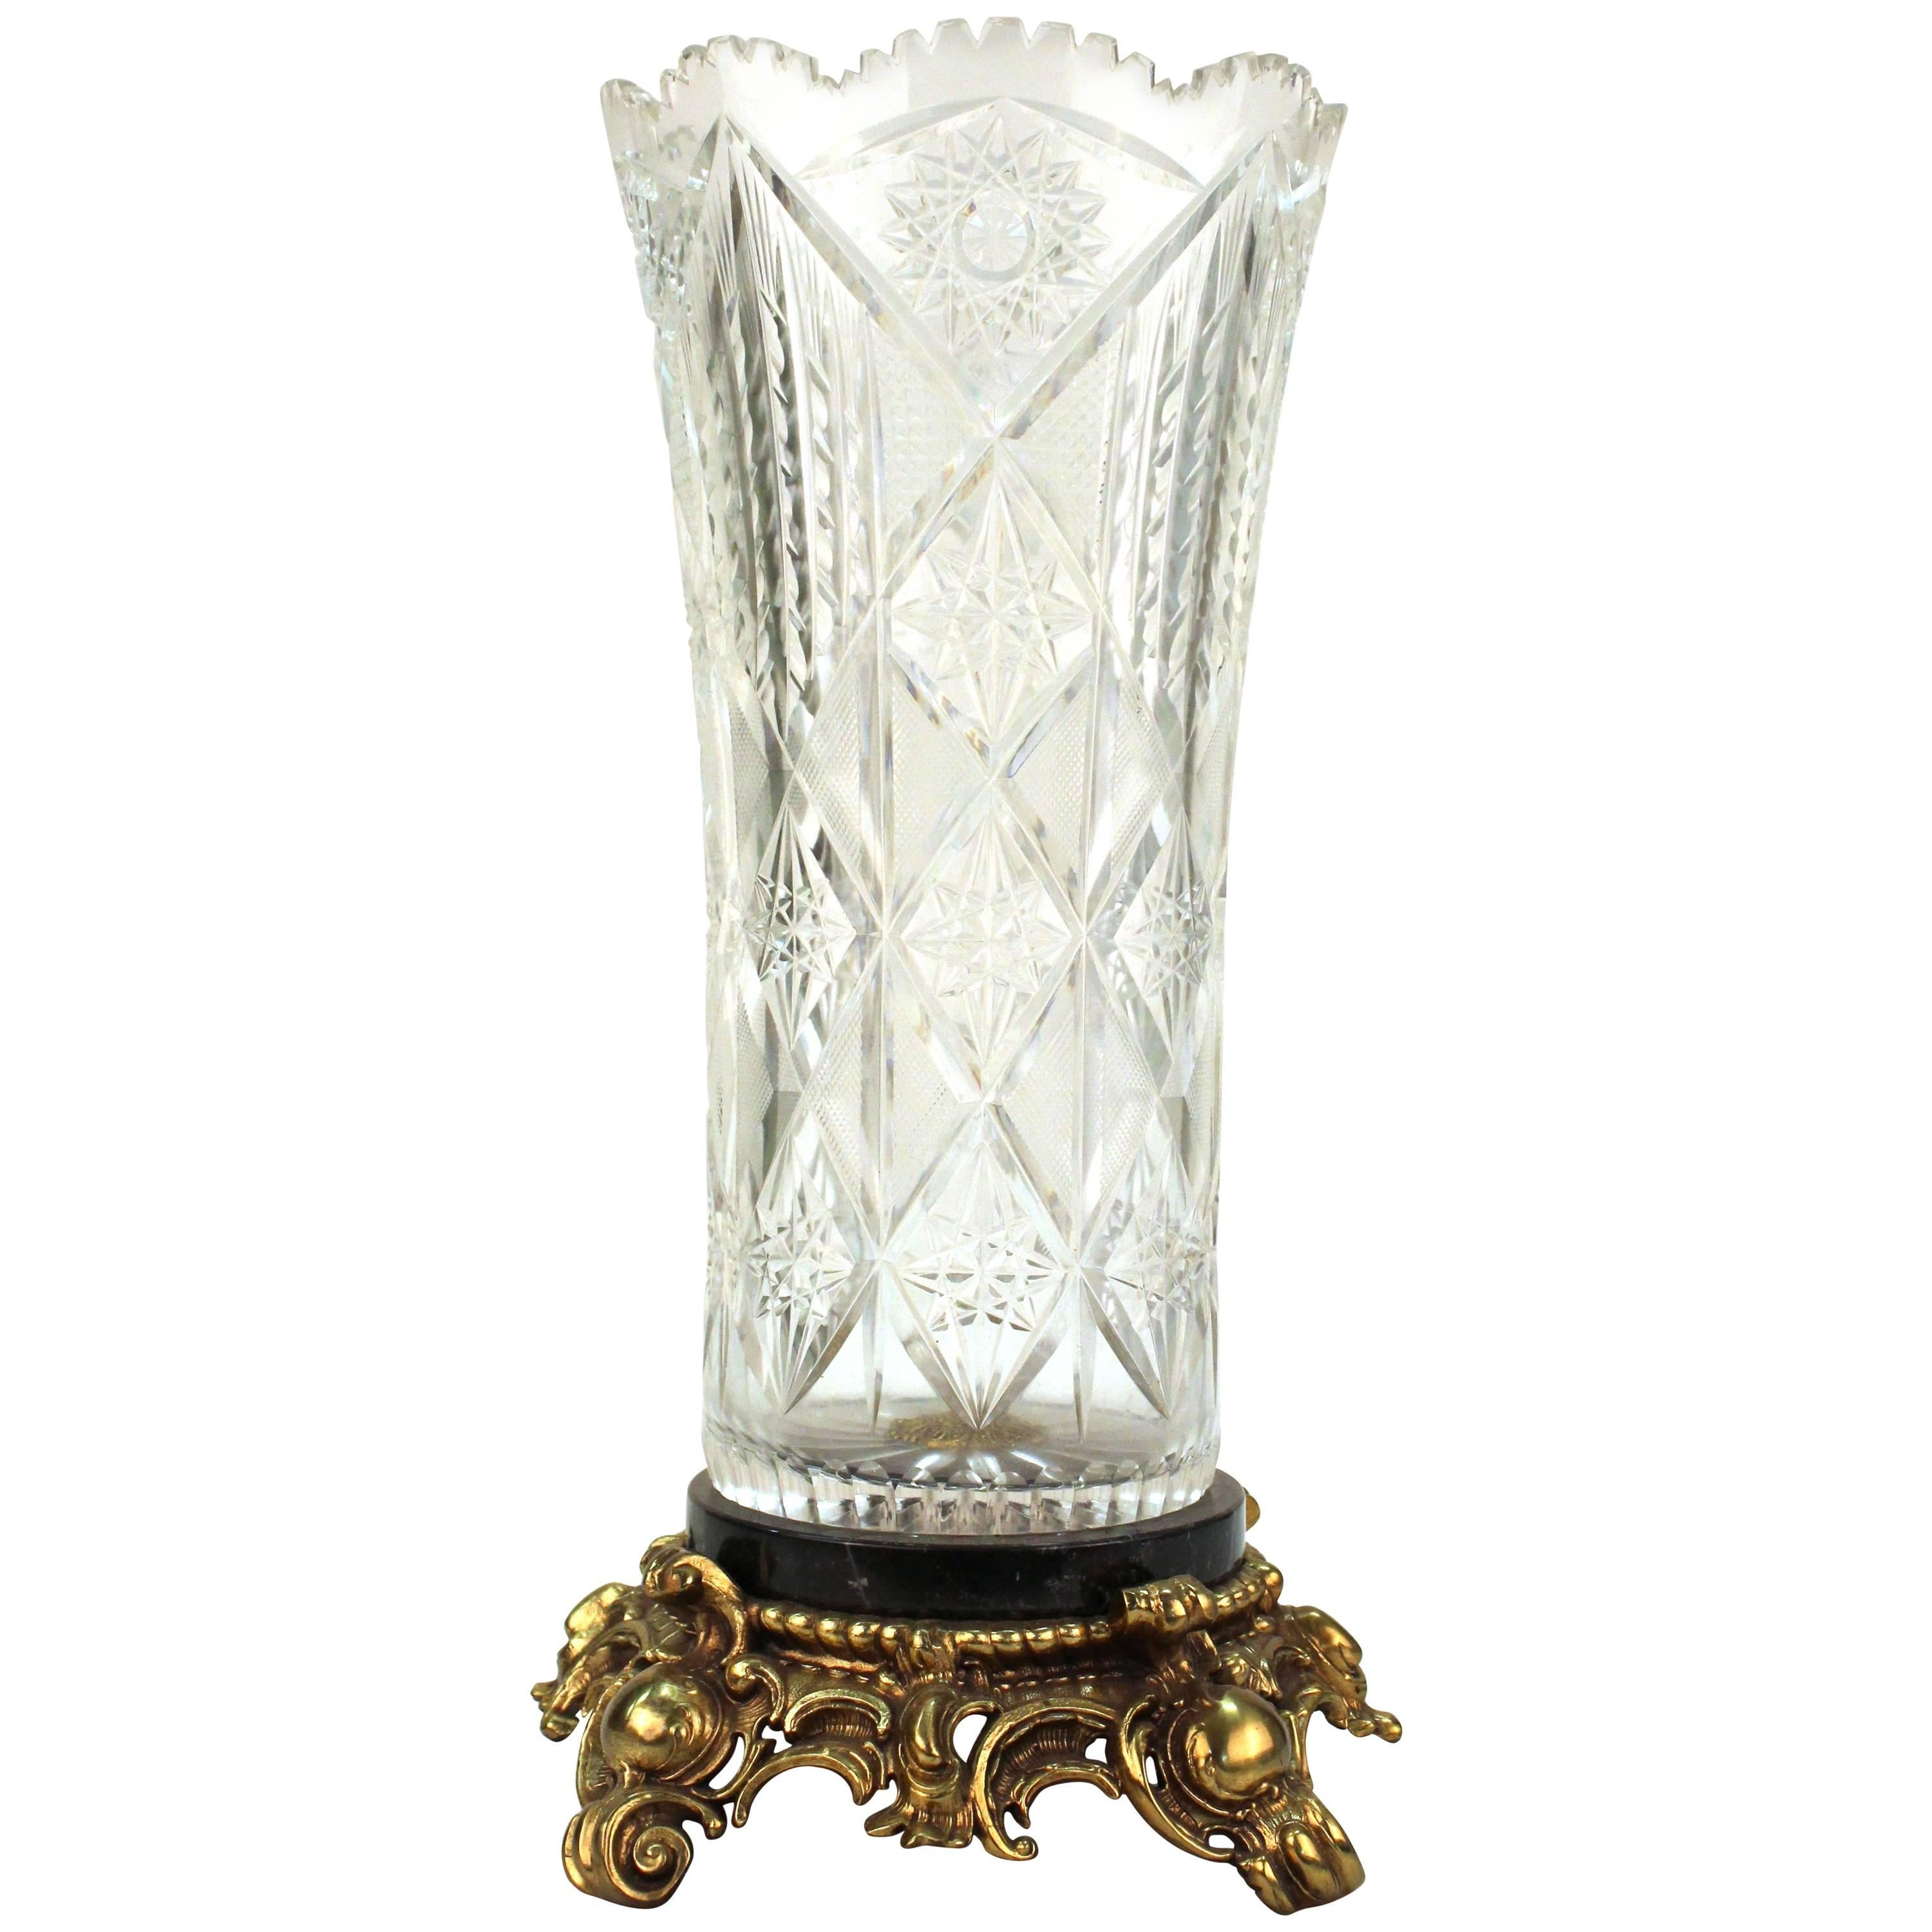 Victorian Cut Crystal Vase on Marble and Gilt Metal Base